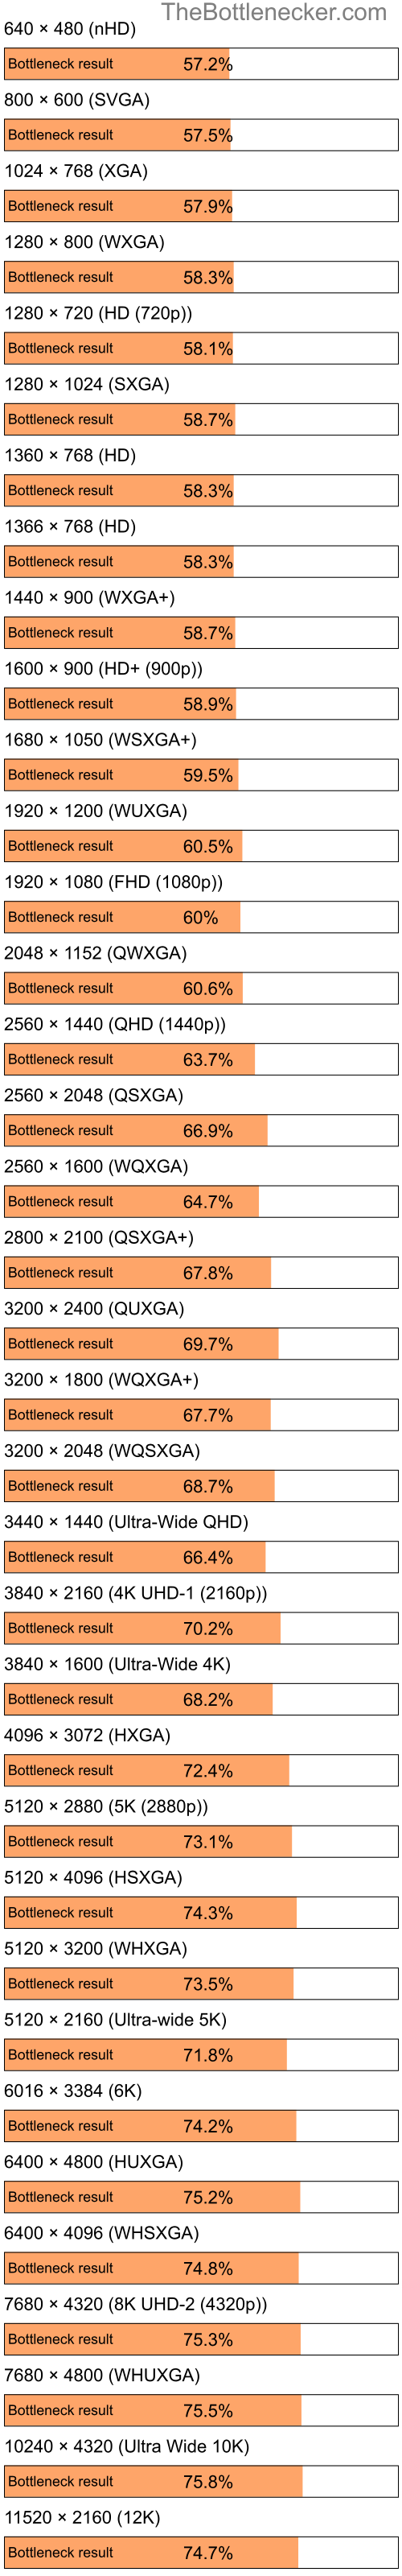 Bottleneck results by resolution for Intel Pentium 4 and NVIDIA Quadro FX 4400 in General Tasks